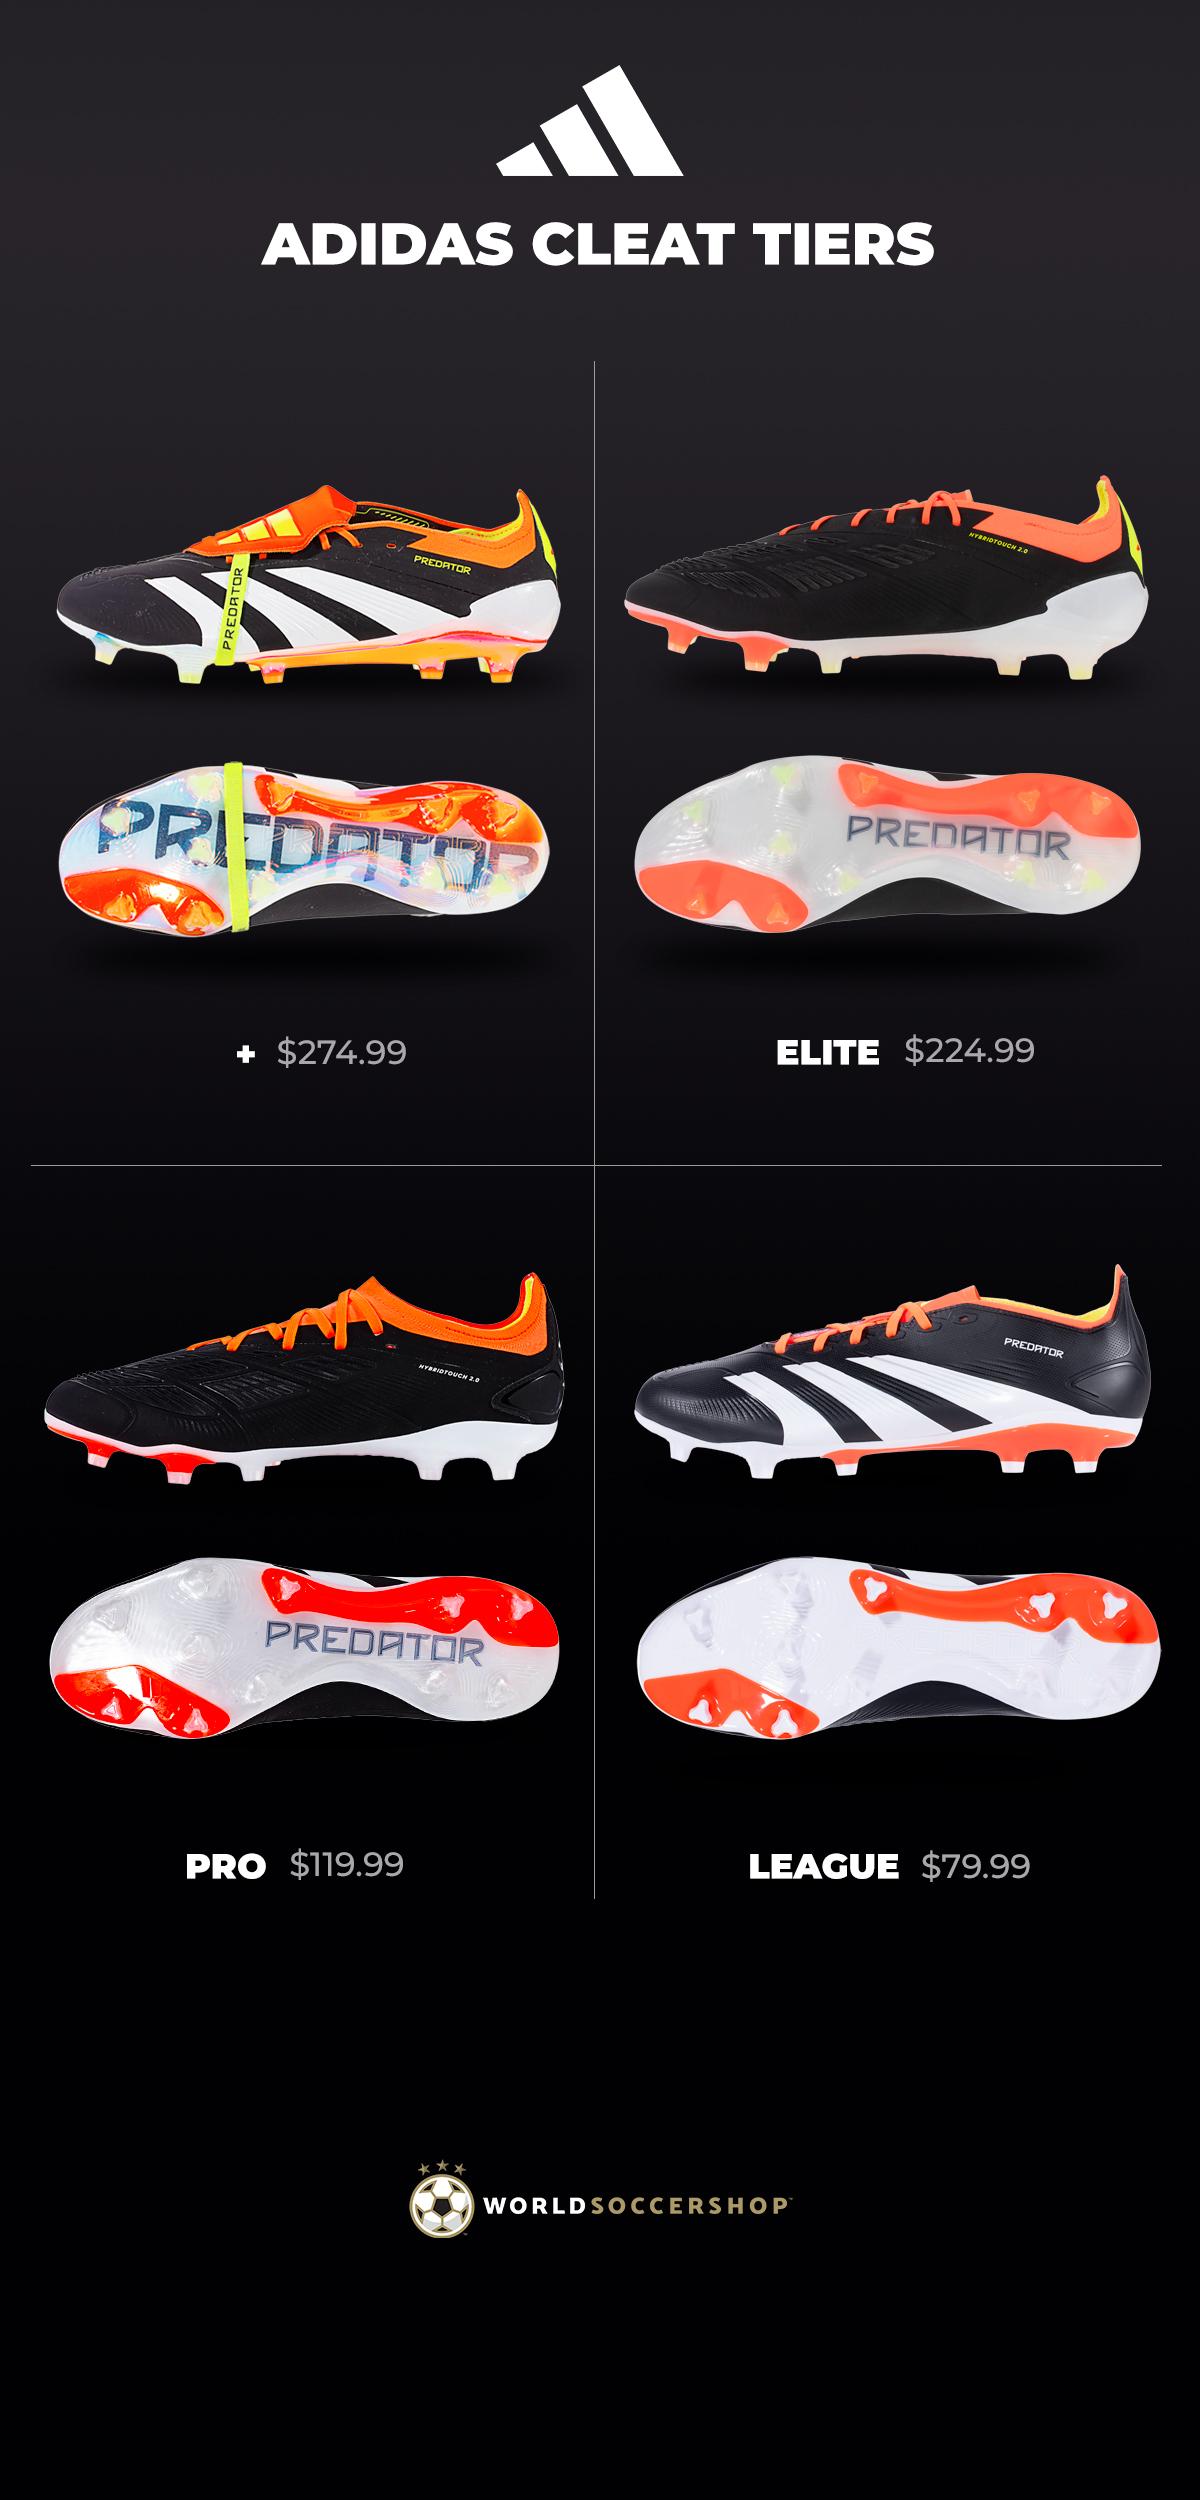 A Breakdown of adidas cleat tier information